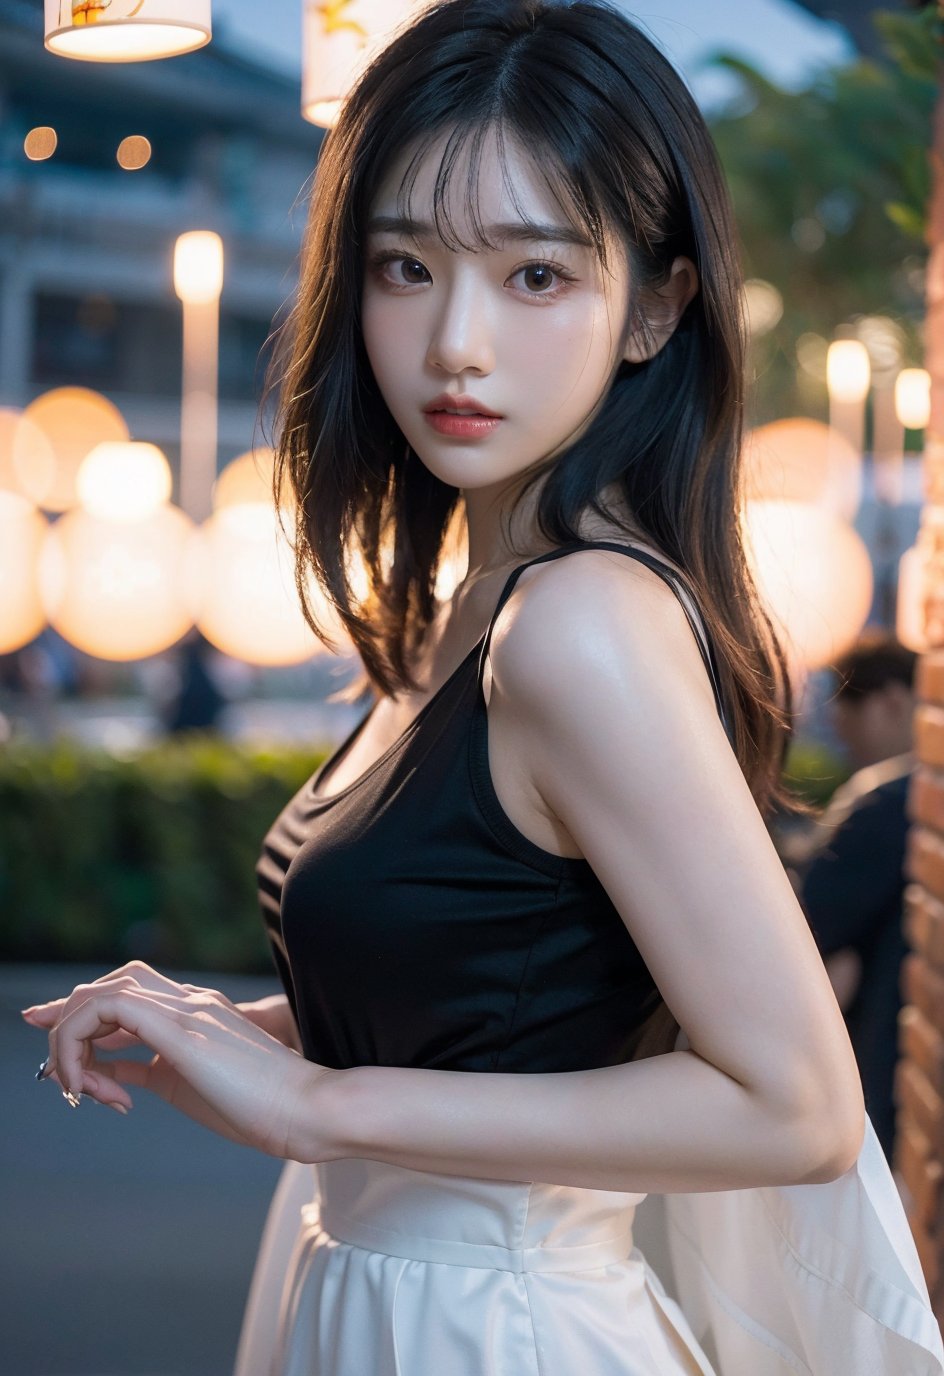 Jihye, 1 girl, detailed face, a woman with long black hair and a black shirt, outdoor scene, (night light),  led lighting, magnificent light, ((fire works)), close up, portrait, upperbody, RAW, (intricate details:1.3), (best quality:1.3), (masterpiece:1.3), (hyper realistic:1.3), best quality, 1 girl, ultra-detailed, ultra high resolution, very detailed mphysically based rendering, dynamic angle, dynamic pose, wind, 8K UHD, Vivid picture, High definition, intricate details, detailed texture, finely detailed, high detail, extremely detailed cg, High quality shadow, a realistic representation of the face, beautiful detailed, (high detailed skin, skin details), slim waist, beautiful and realistic and detailed hands and fingers:1, best ratio four finger and one thumb, (detailed face, detailed eyes, beautiful face), ((korean beauty, kpop idol, ulzzang, korean celebrity, korean cute, korean actress, korean, a beautiful 18 years old beautiful korean girl)), (high detailed skin, skin details), Detailed beautiful delicate face, Detailed beautiful delicate eyes, a face of perfect proportion, (beautiful and realistic and detailed hands and fingers:1.3), (Big breasts:1.3), (full body shot:1.3), (long legs:1.3), (sparkling eyes:1.3), (sparkling lips:1.3), taken by Canon EOS, SIGMA Art Lens 35mm F1.4, ISO 200 Shutter Speed 2000, Vivid ((korean beauty, kpop idol, ulzzang, korean celebrity, korean cute, korean actress, korean, 인스타 여신:1.3, a beautiful 18 years old beautiful korean girl)), (blue eye), (black long hair),chanel_jewelry, chanel_bag, vancleef_necklace,Nice legs and hot body, see-through,hourglass bodyshape ,Jihye,Bomi